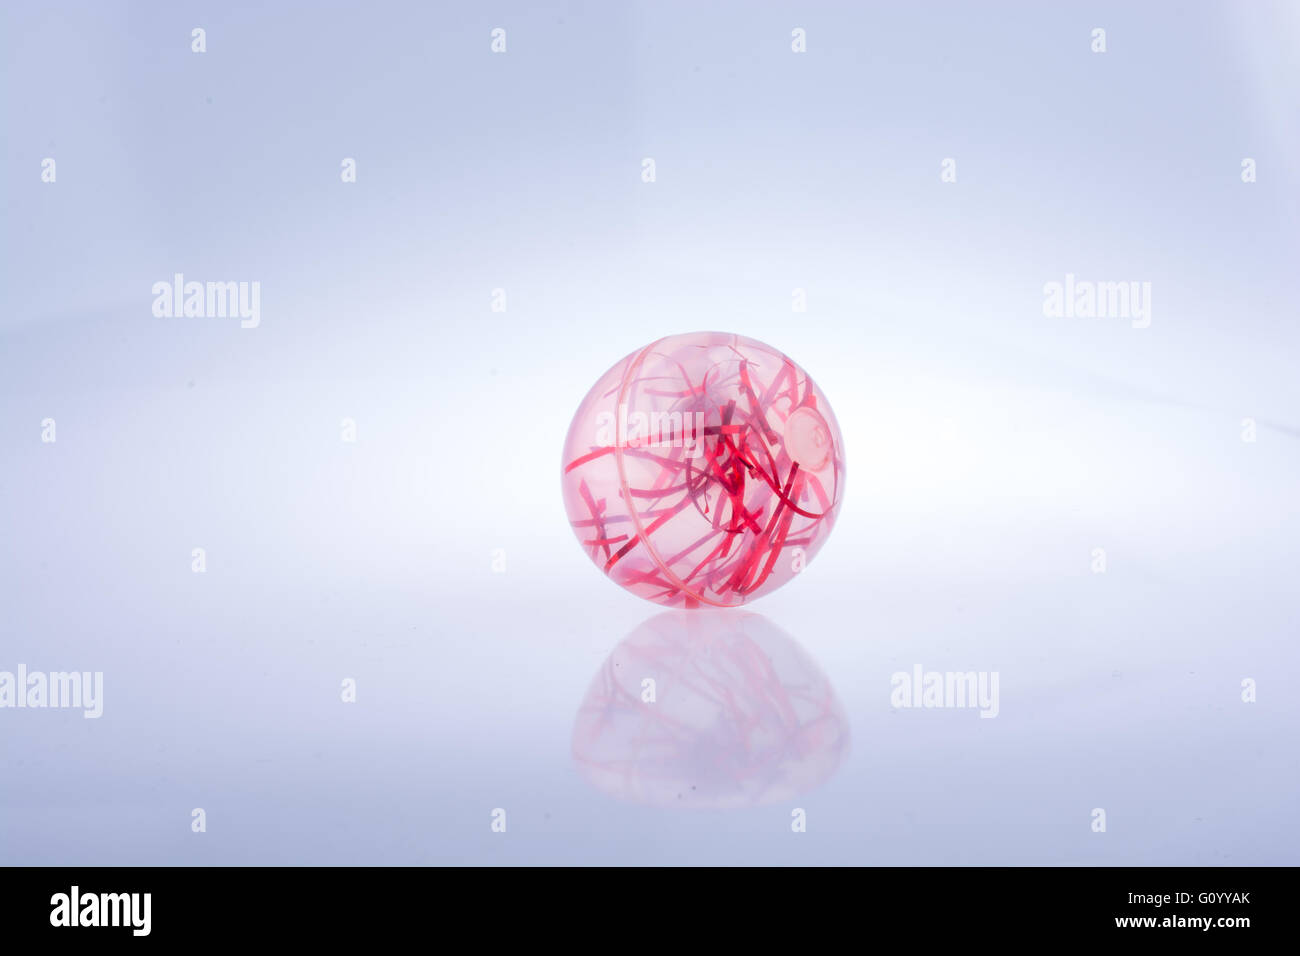 Red transparent ball  with red htreads in placed on white background Stock Photo